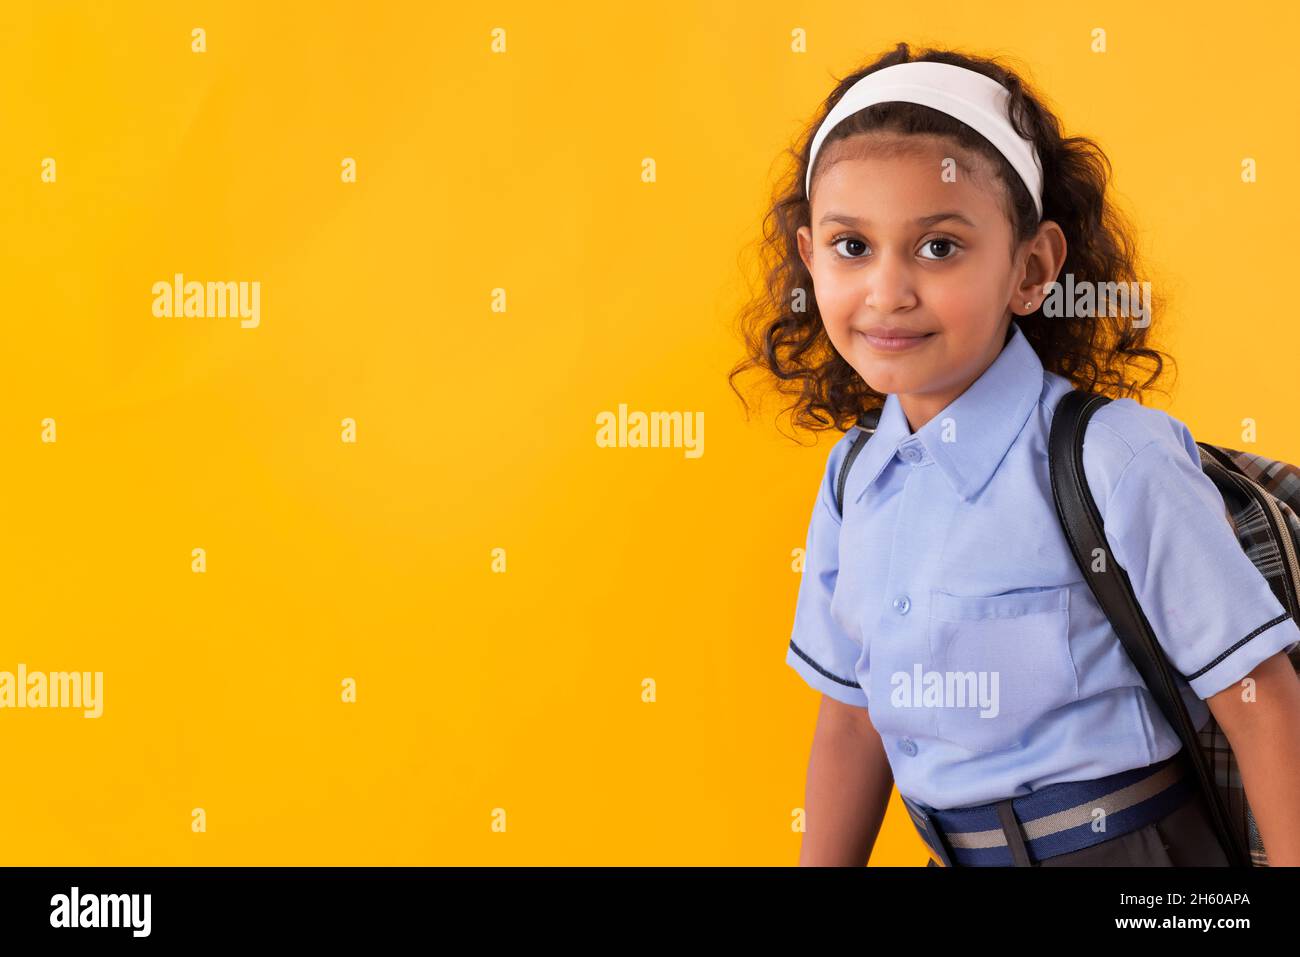 A YOUNG GIRL IN UNIFORM STANDING AND LOOKING AT CAMERA Stock Photo